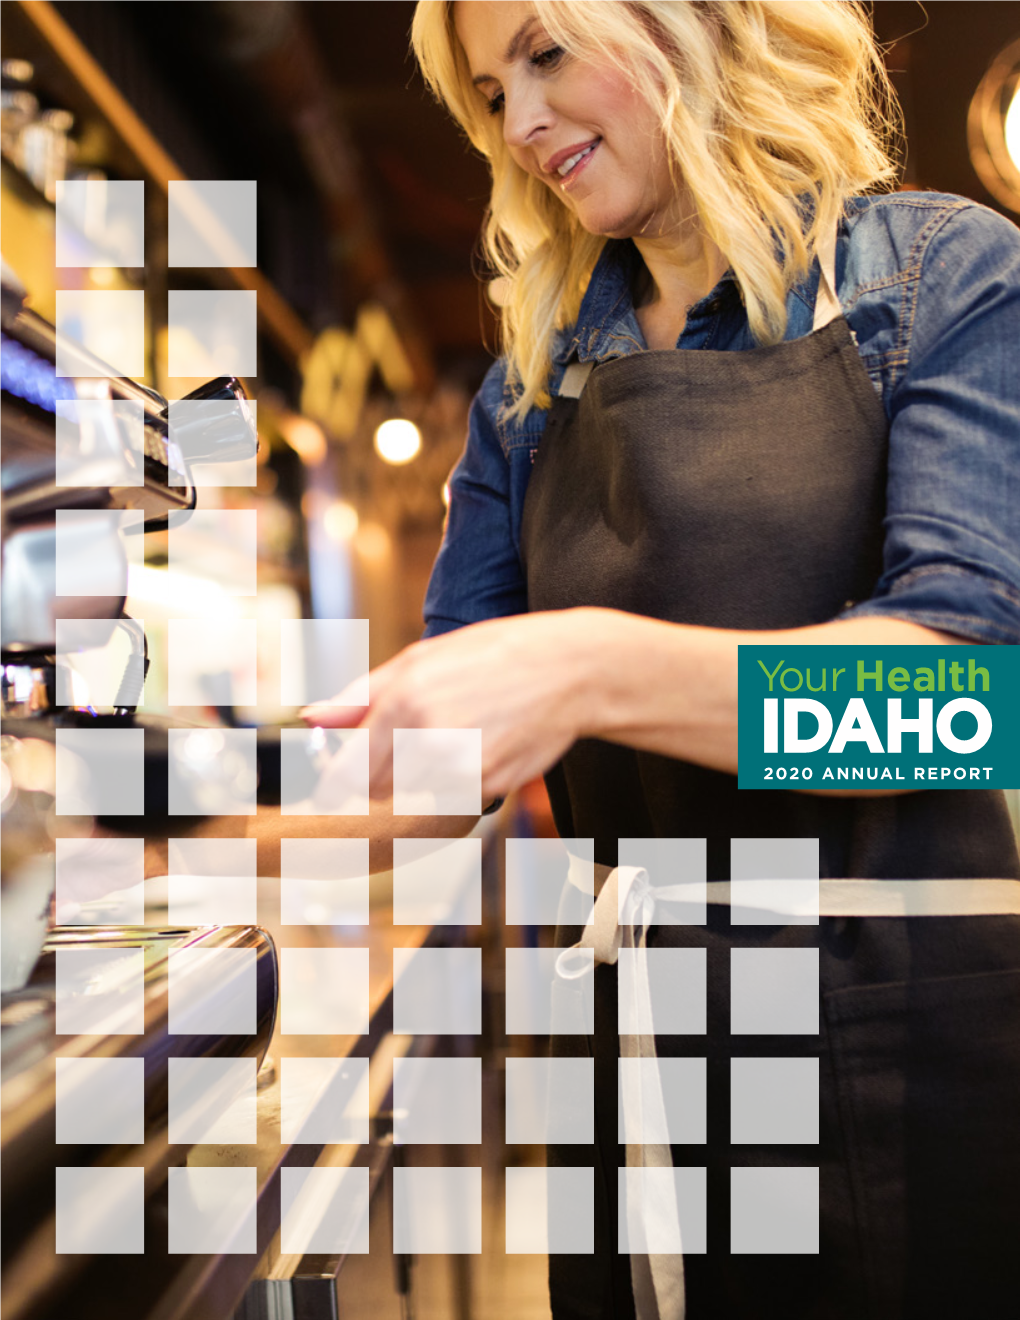 Your Health Idaho 2020 Annual Report